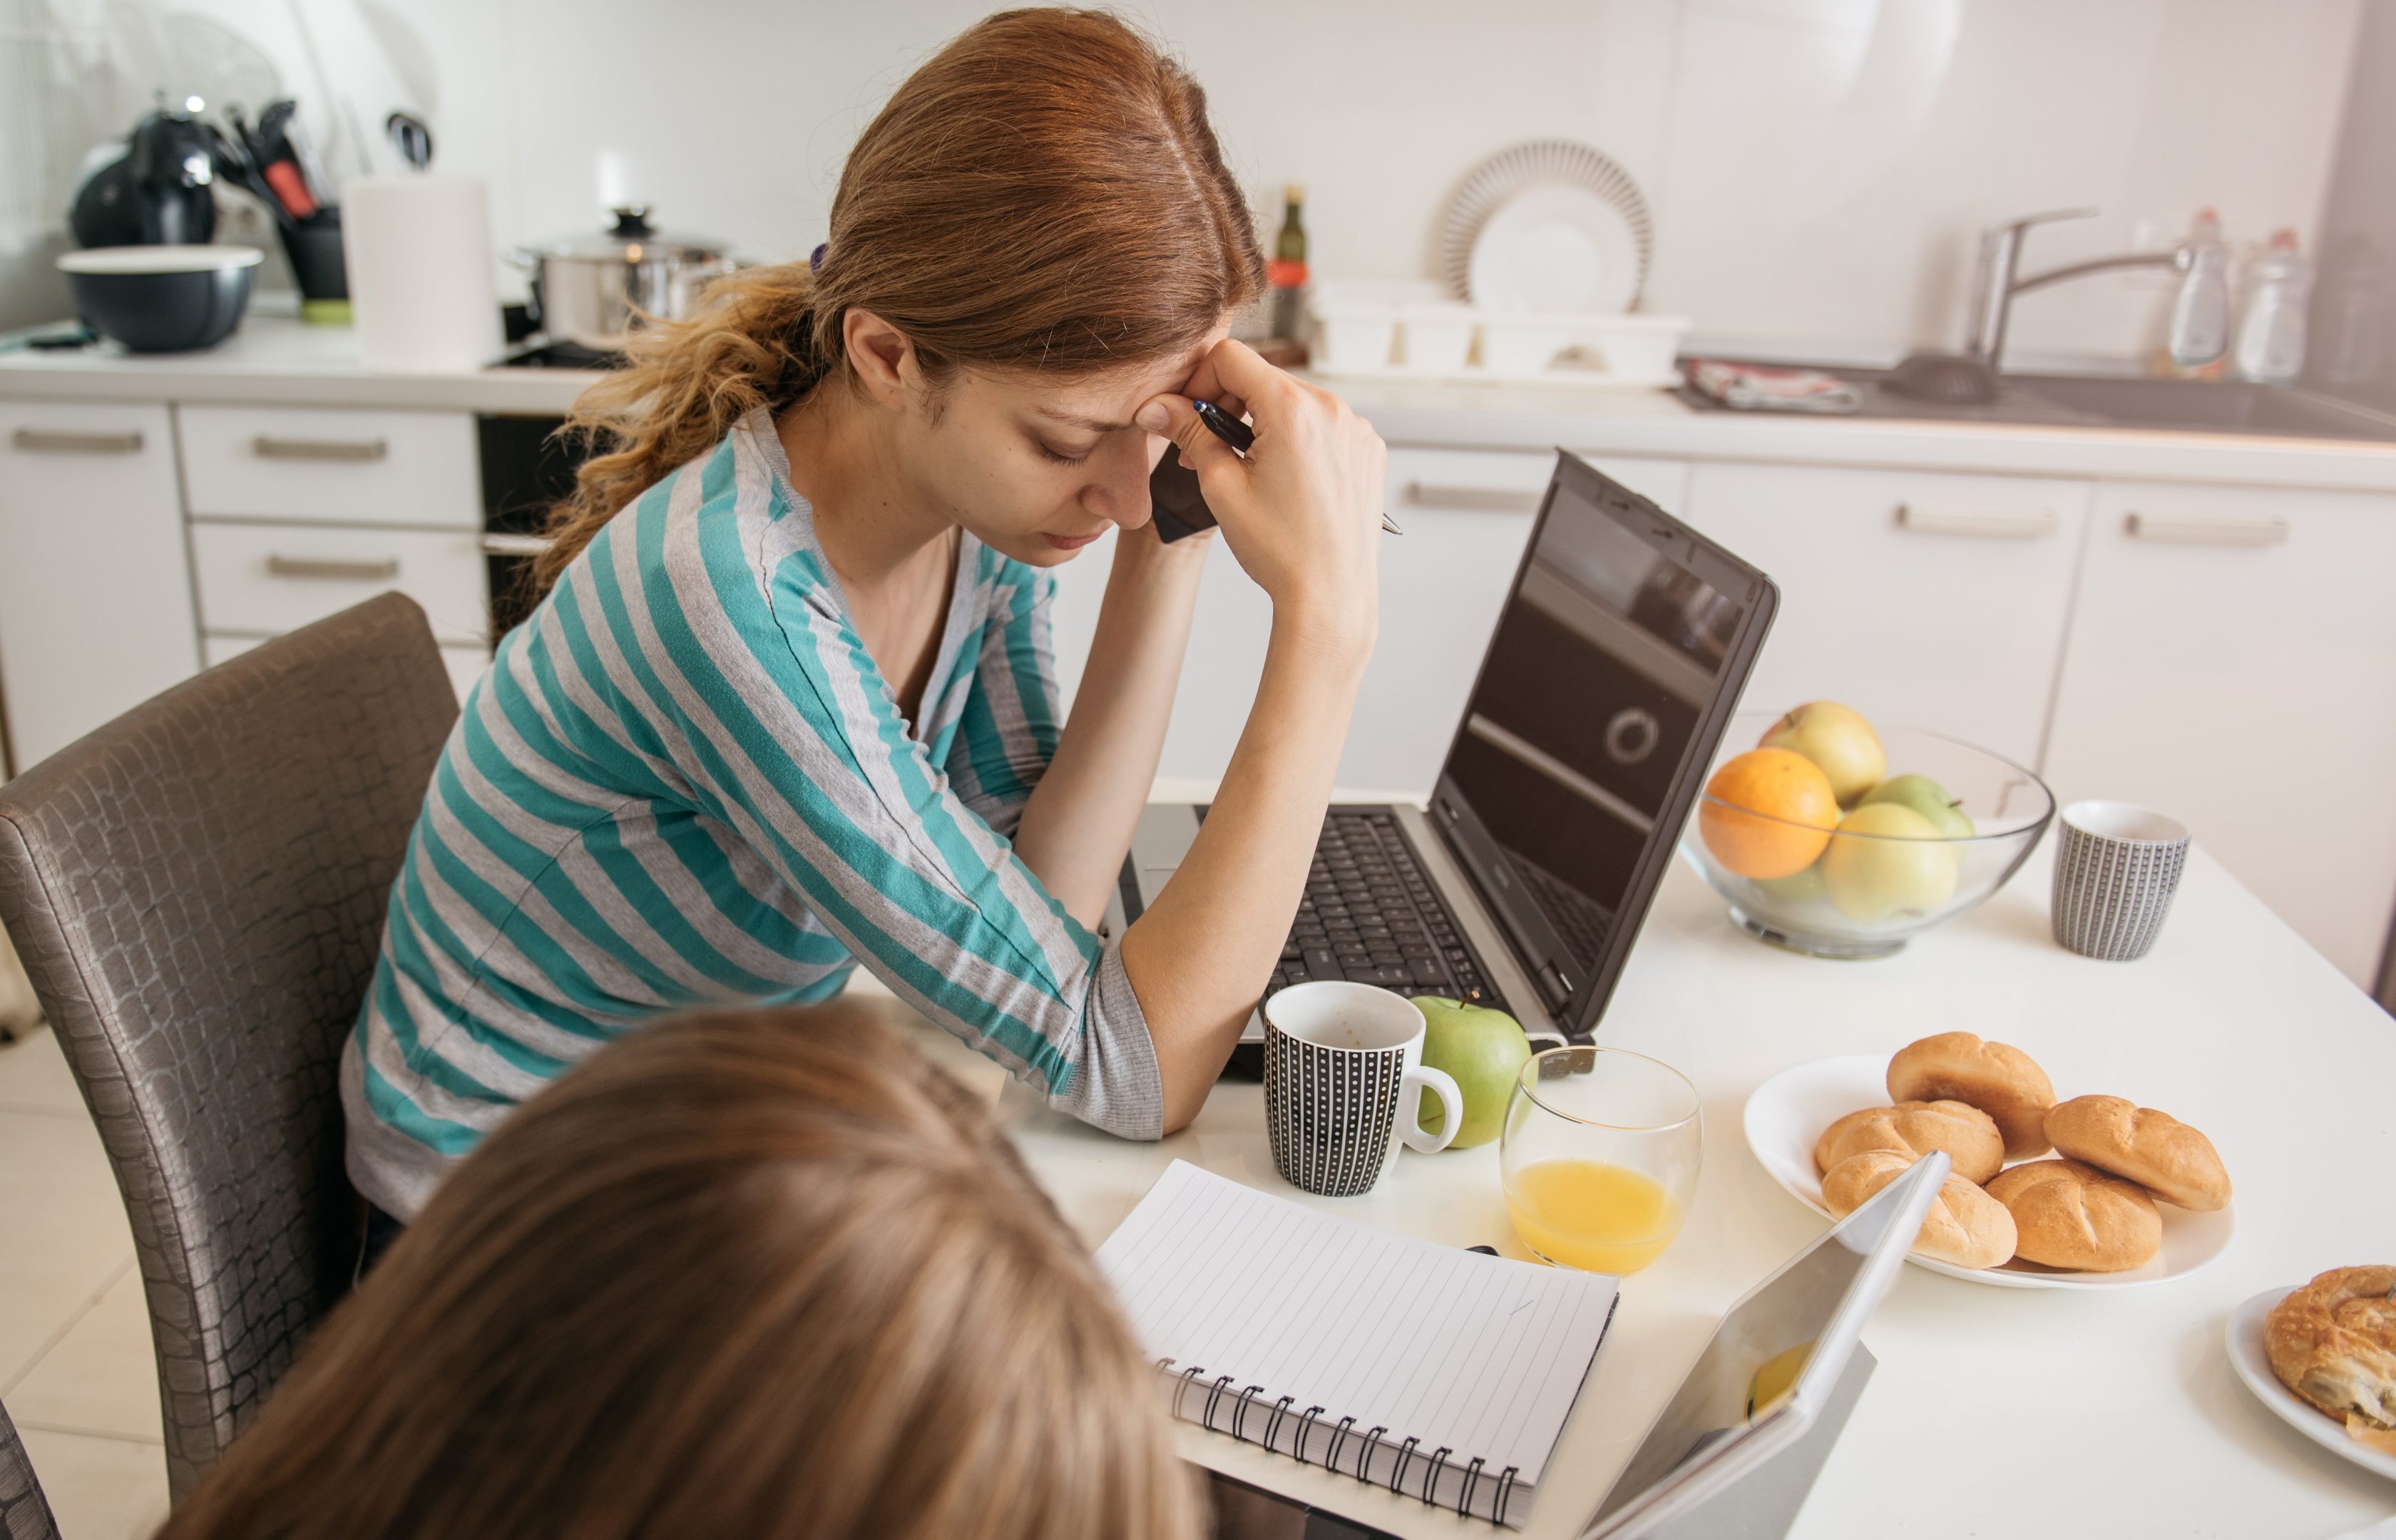 Low pay is "endemic" in the UK, especially among women in their early 20s who juggle work with childcare responsibilities (iStock)